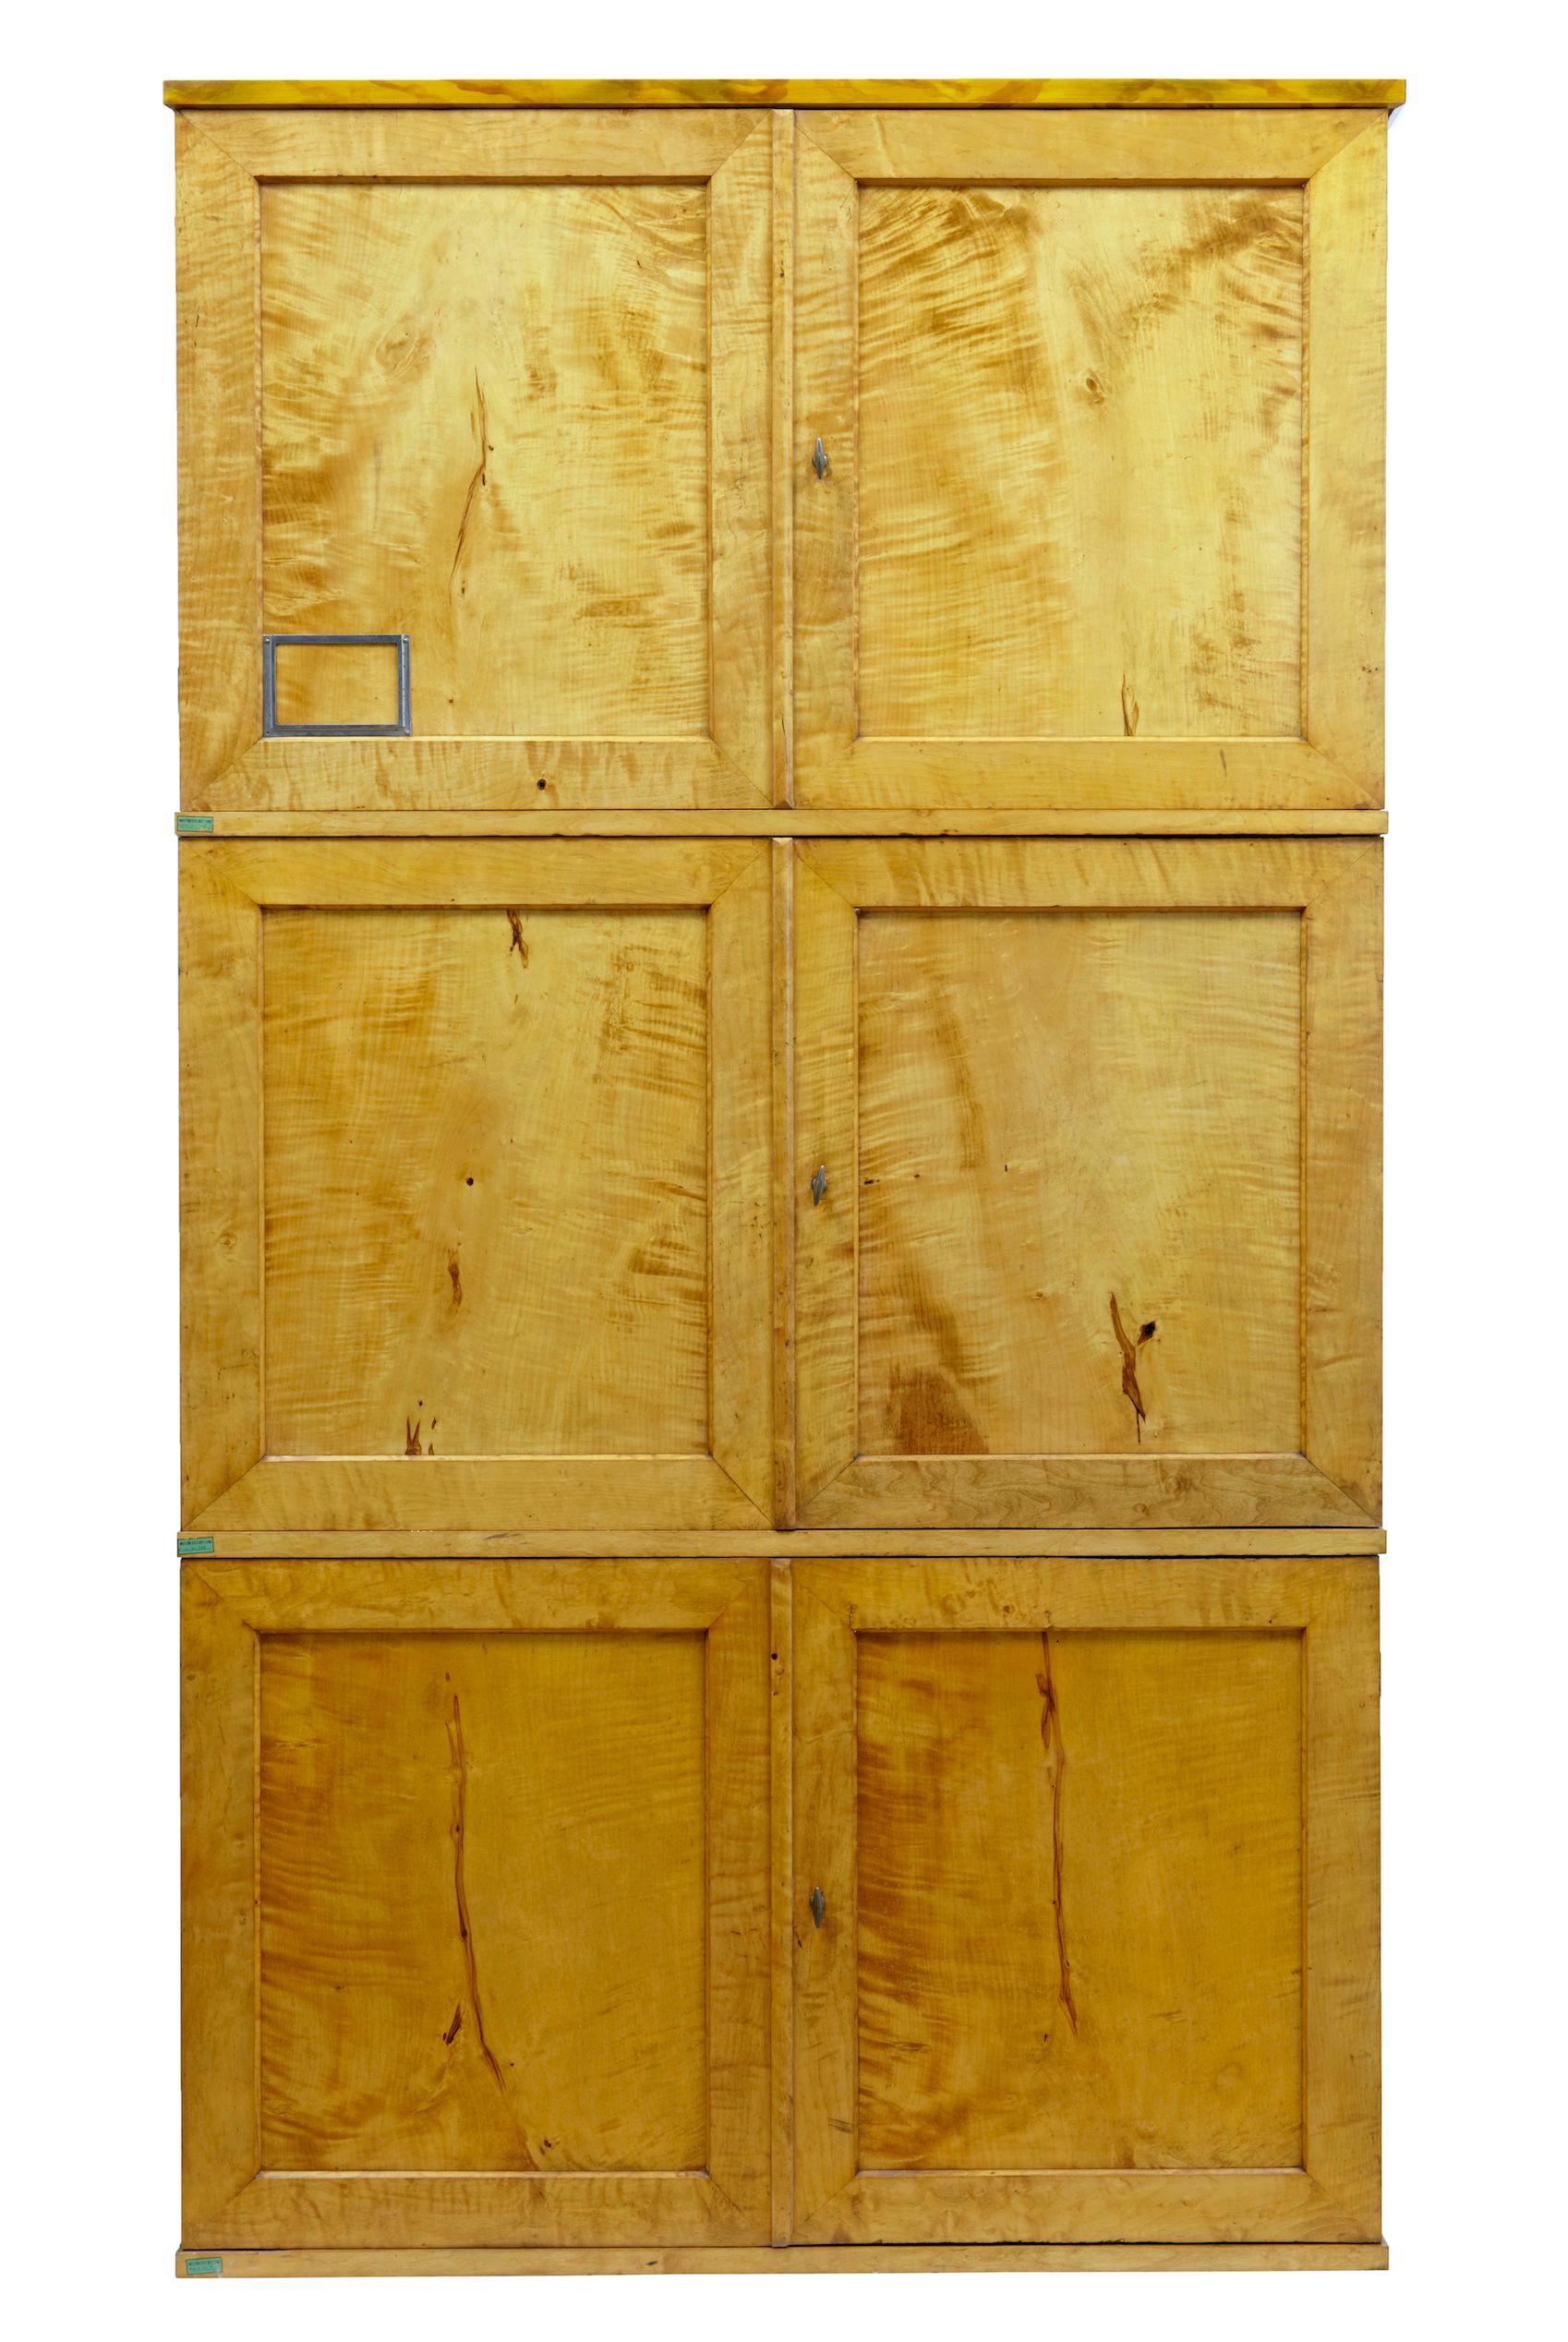 Set of 3 stackable late 19th century cupboards, circa 1895

Rare set of 3 birch lockers presenting the ideal opportunity for a collector or shop fitting with this piece. Good color and patina on the birch, each cupboard contains 20 sections.